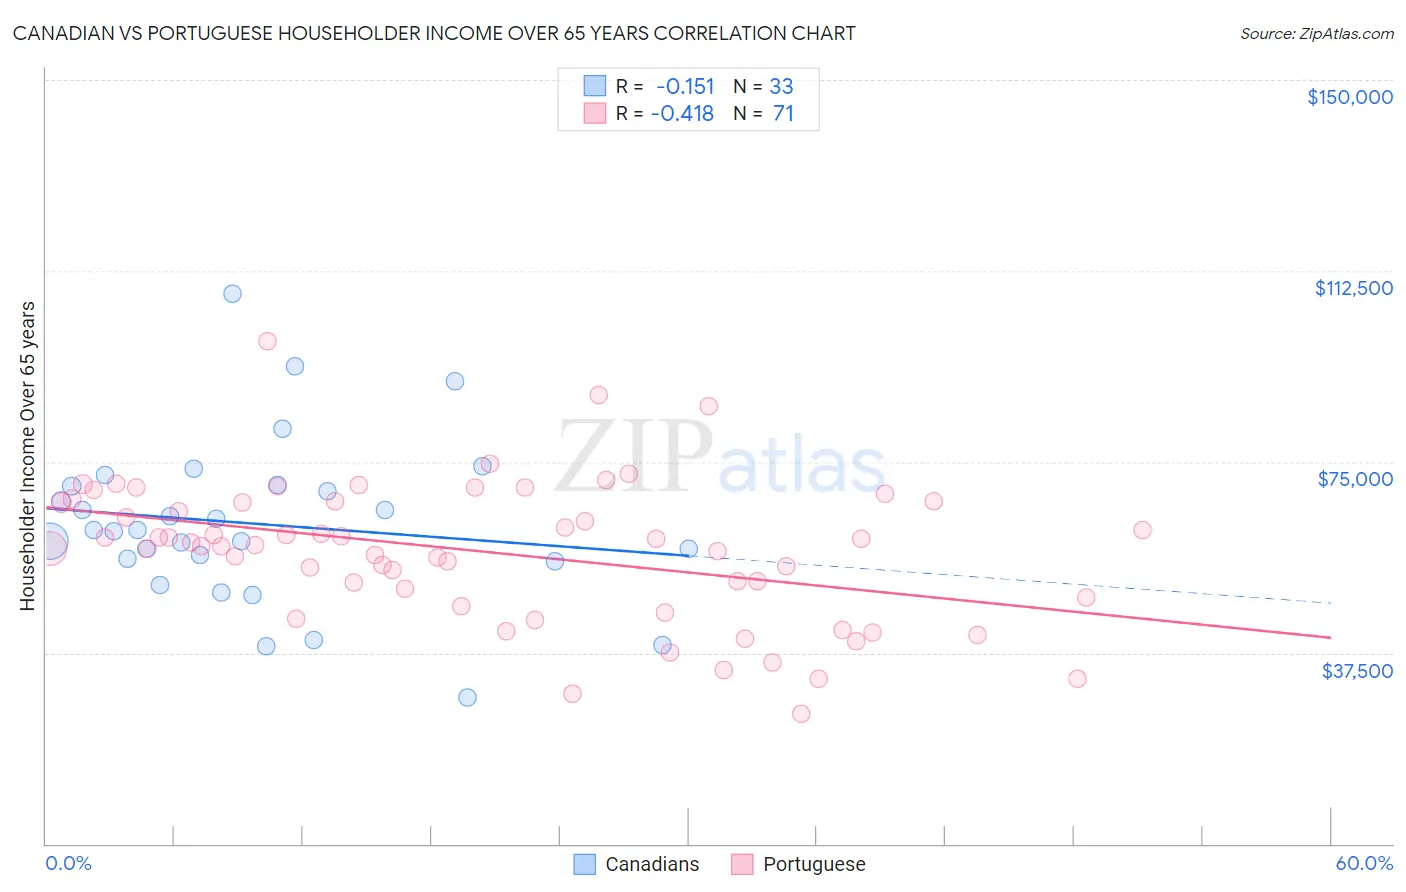 Canadian vs Portuguese Householder Income Over 65 years